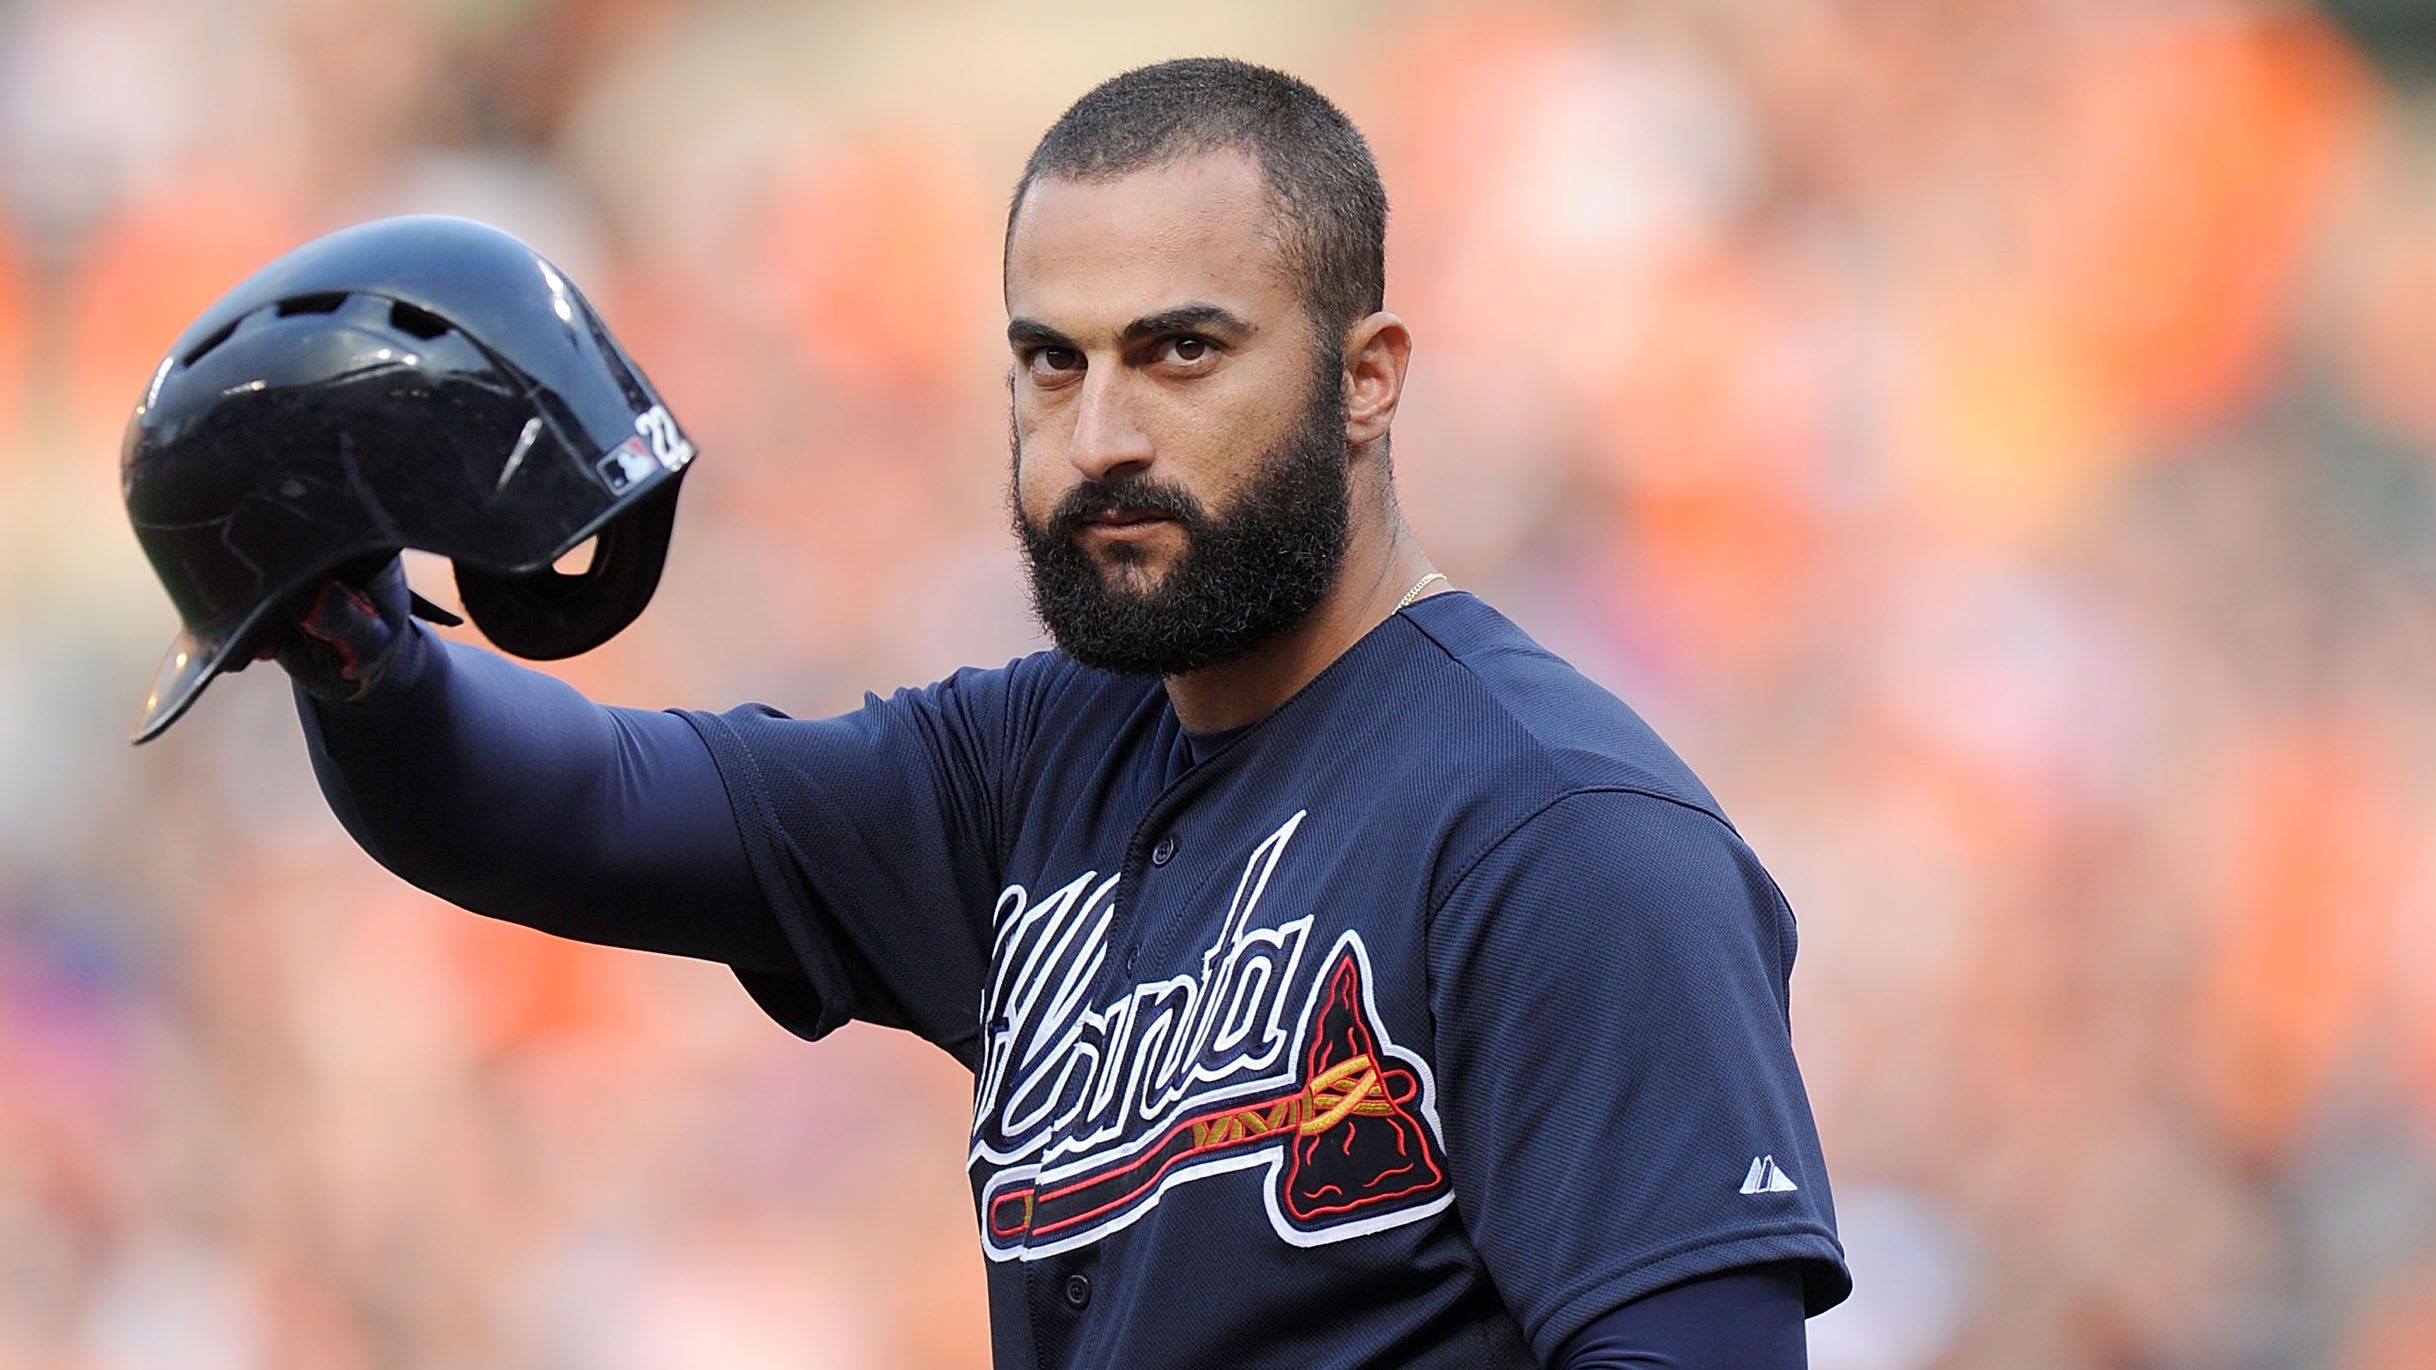 22-astounding-facts-about-nick-markakis